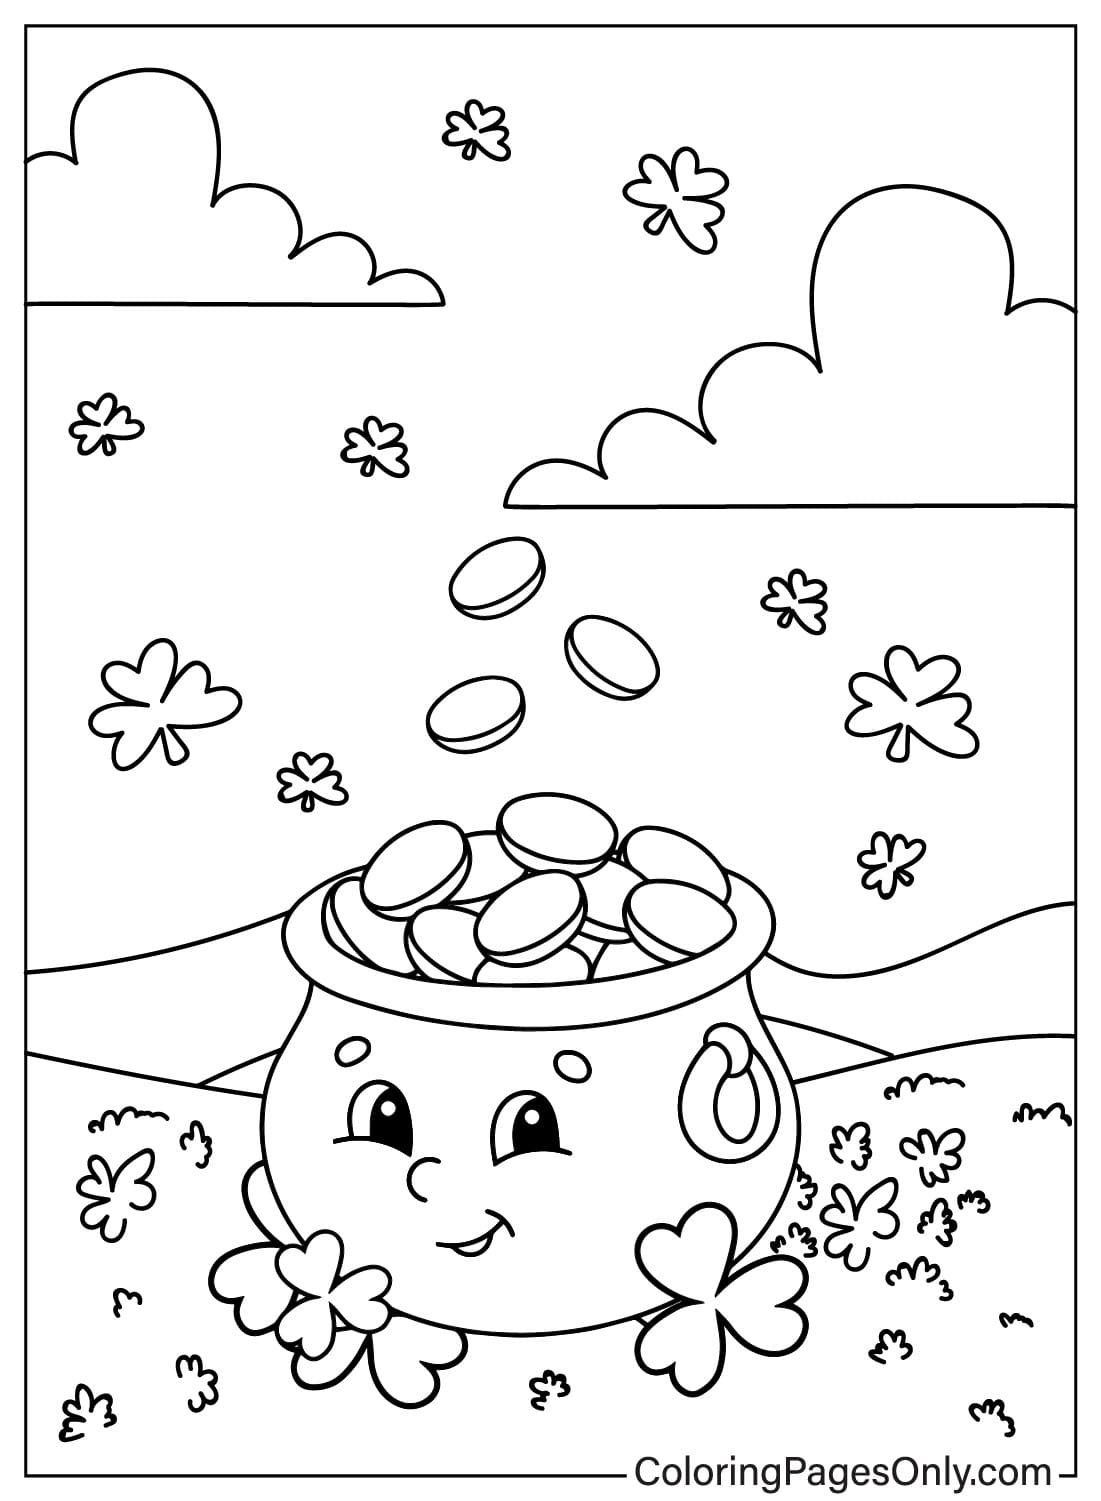 Pot of Gold Free Coloring Page